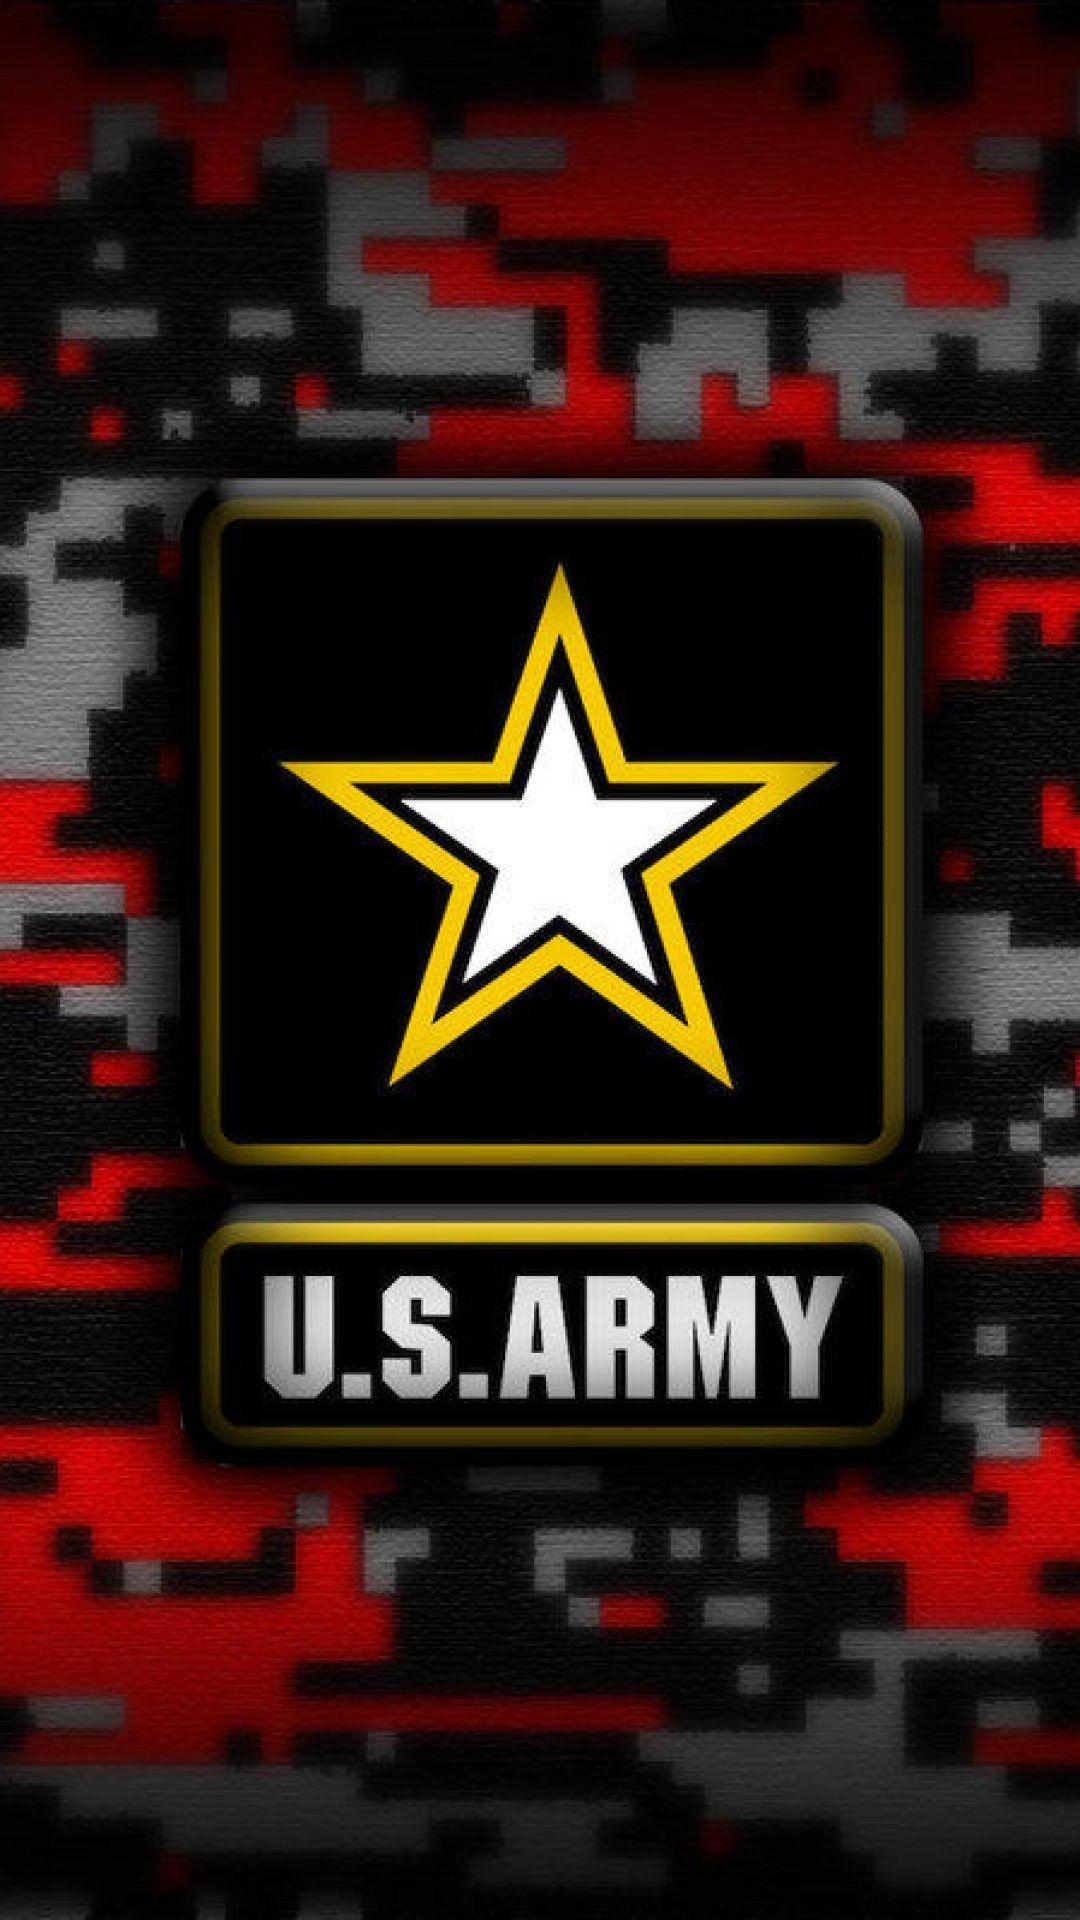 U.s. Army Iphone Wallpapers - Wallpaper Cave